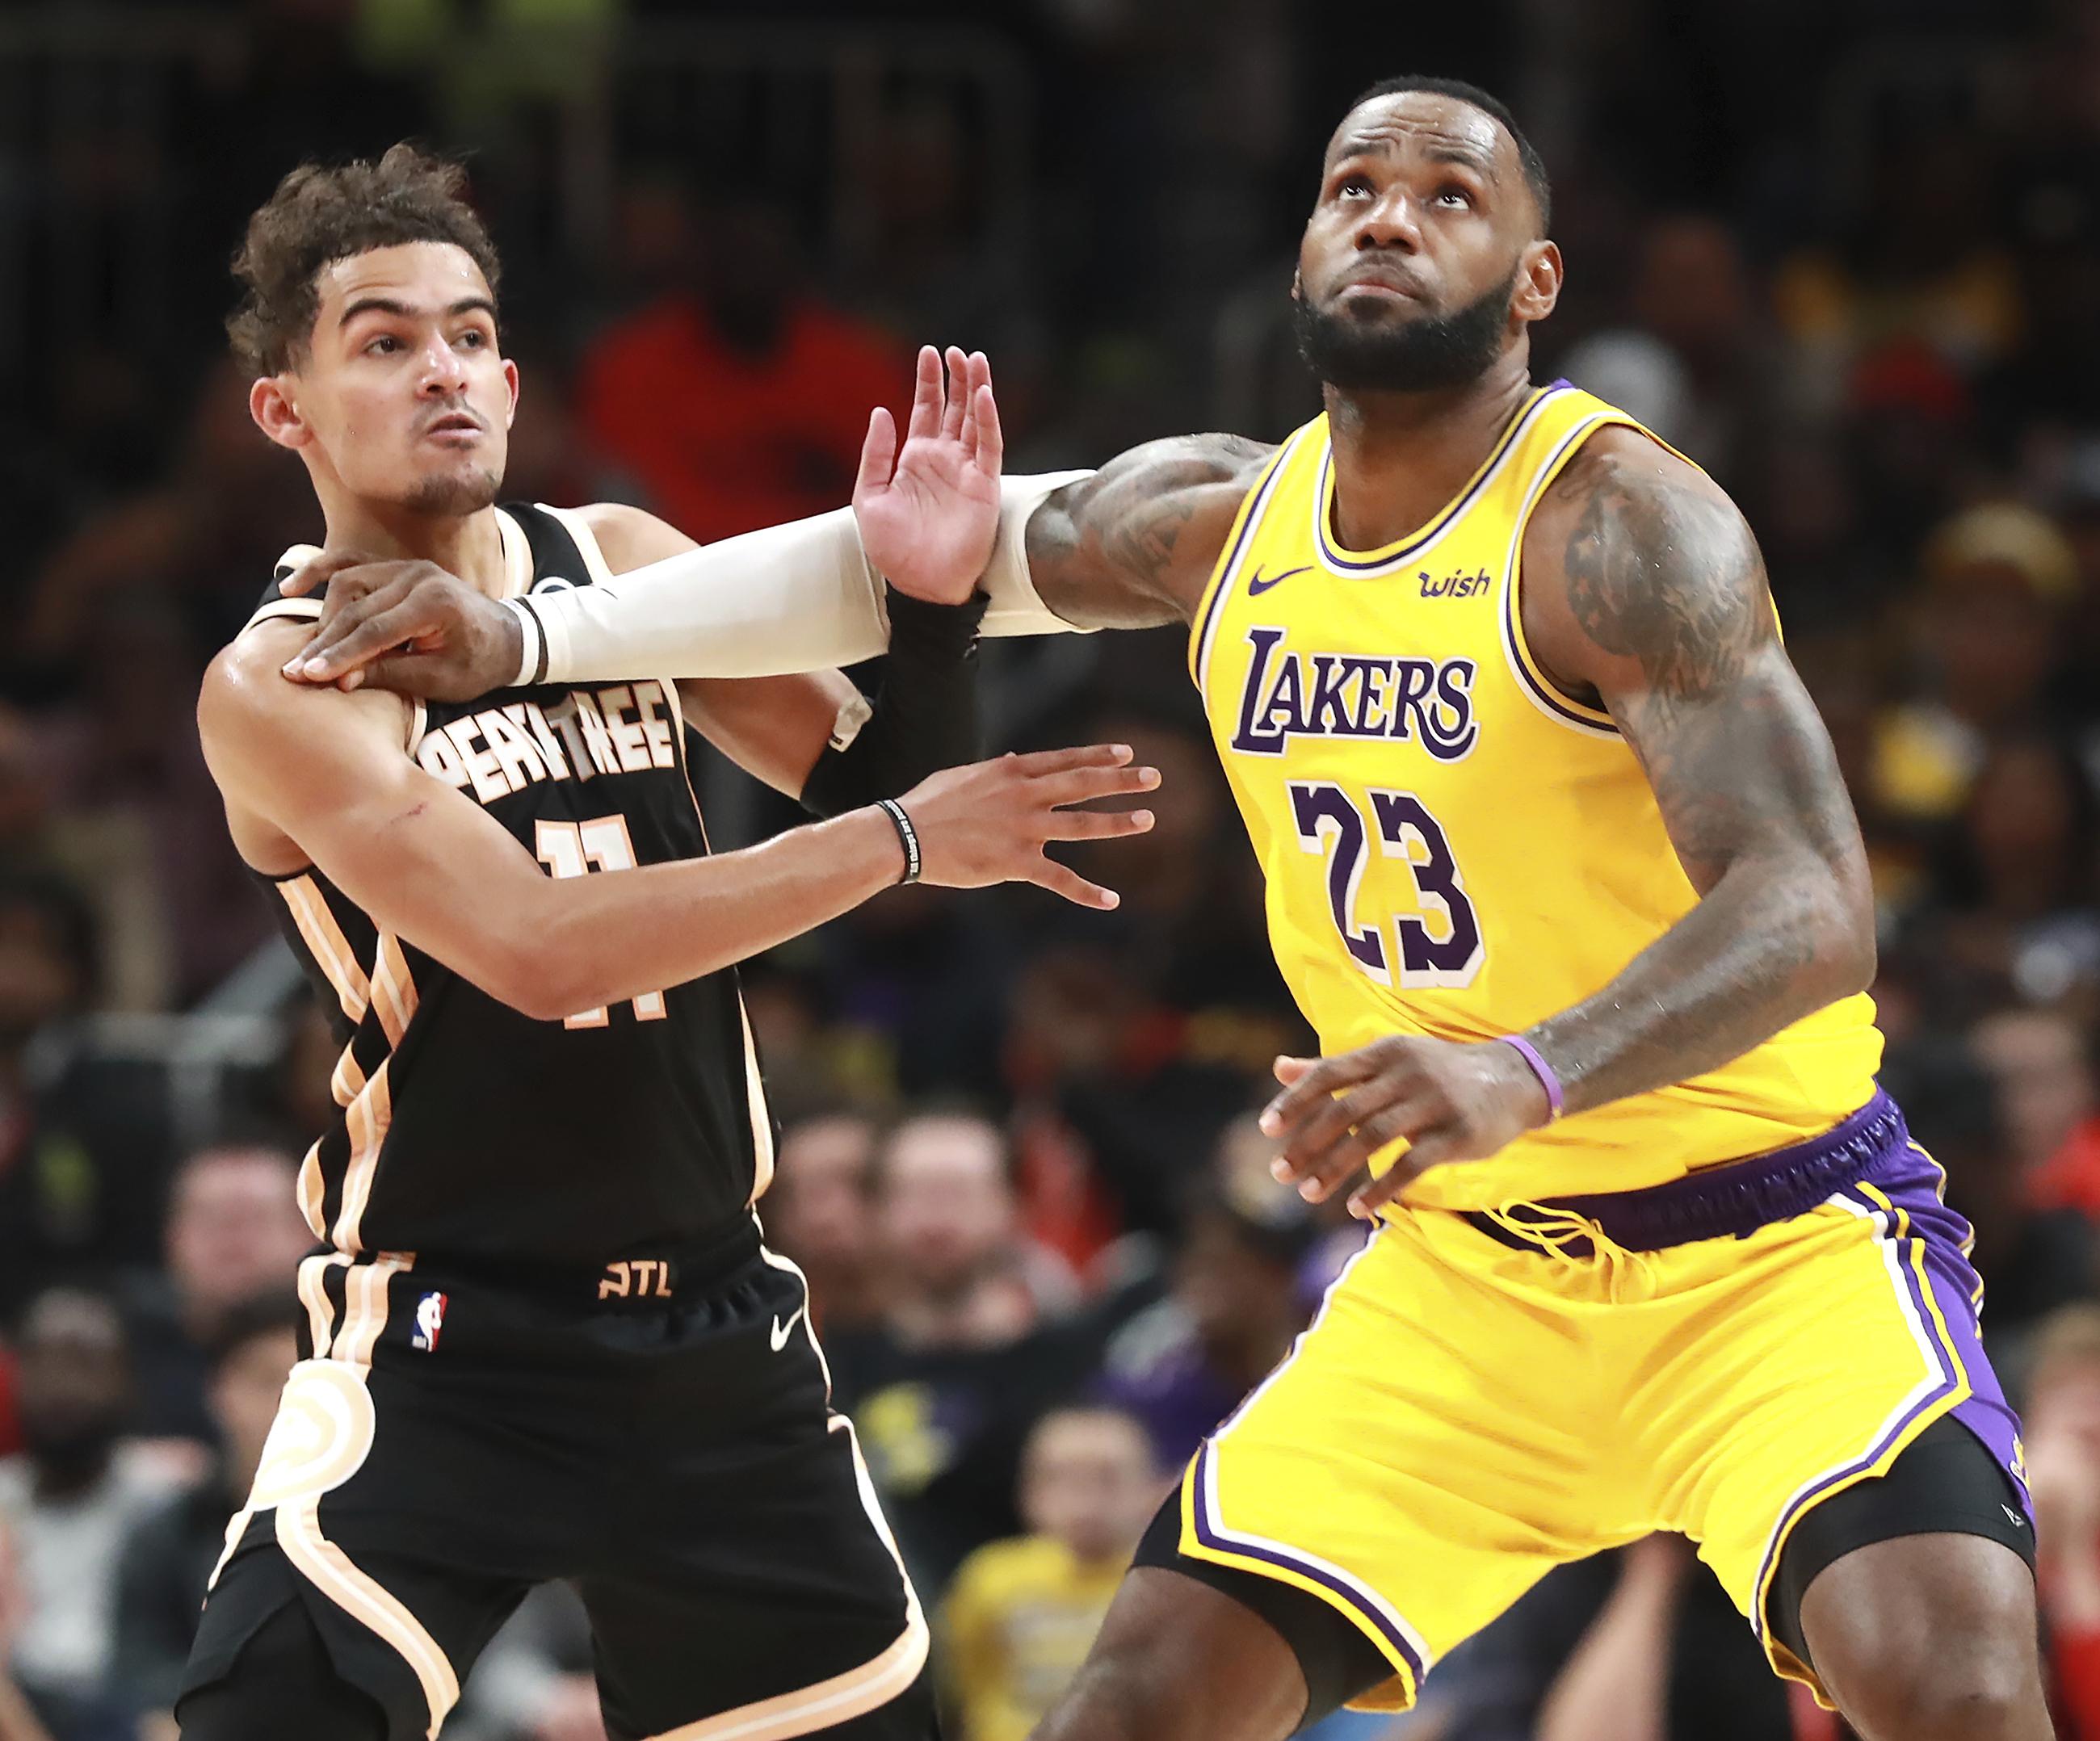 NBA roundup: LeBron James, Lakers beat Hawks for 7th win in a row | The Spokesman-Review